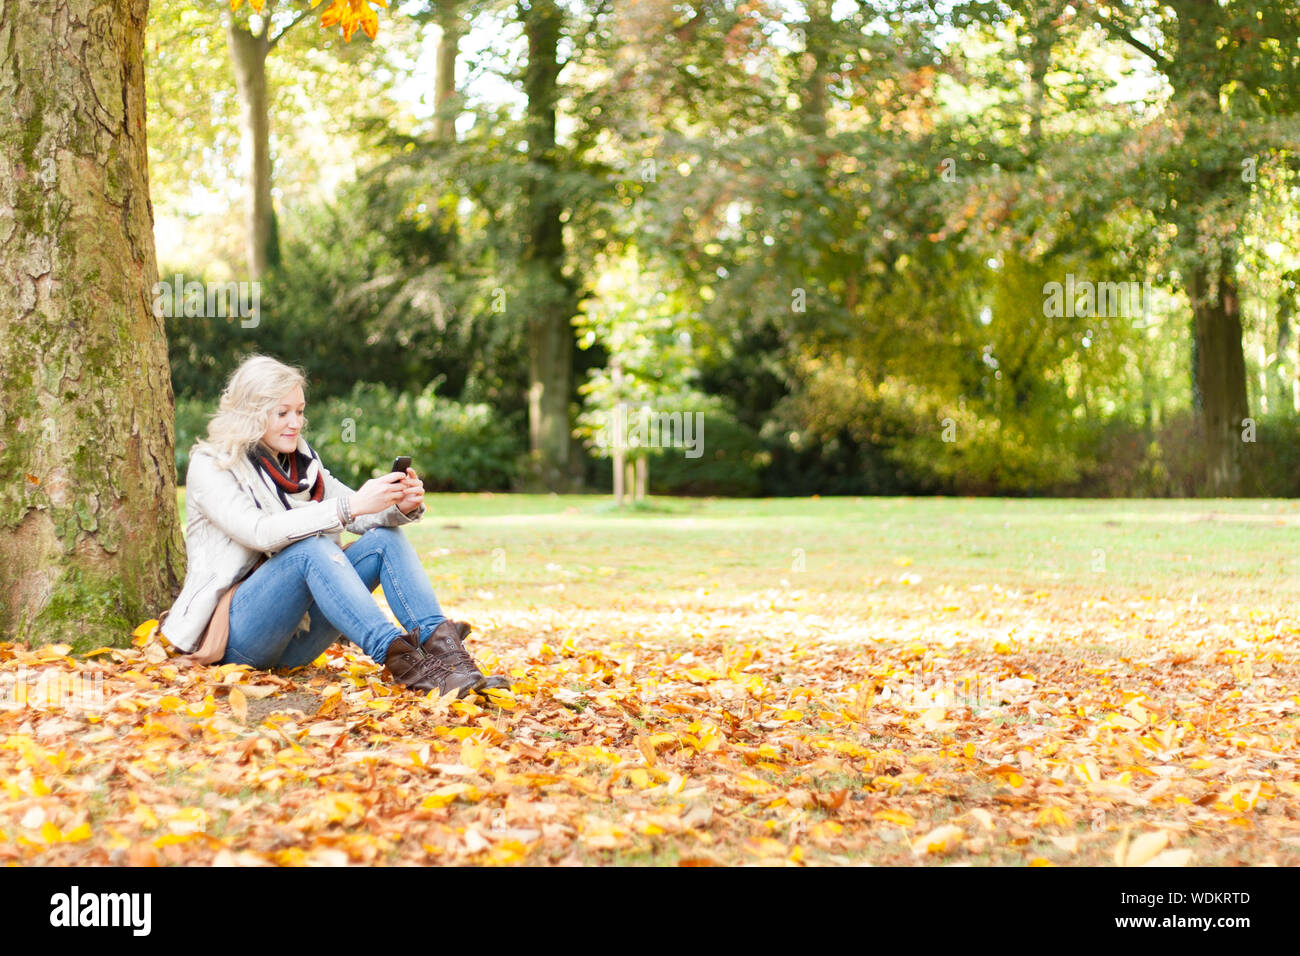 Woman Using Phone While Sitting On Fallen Autumn Leaves At Park Stock Photo